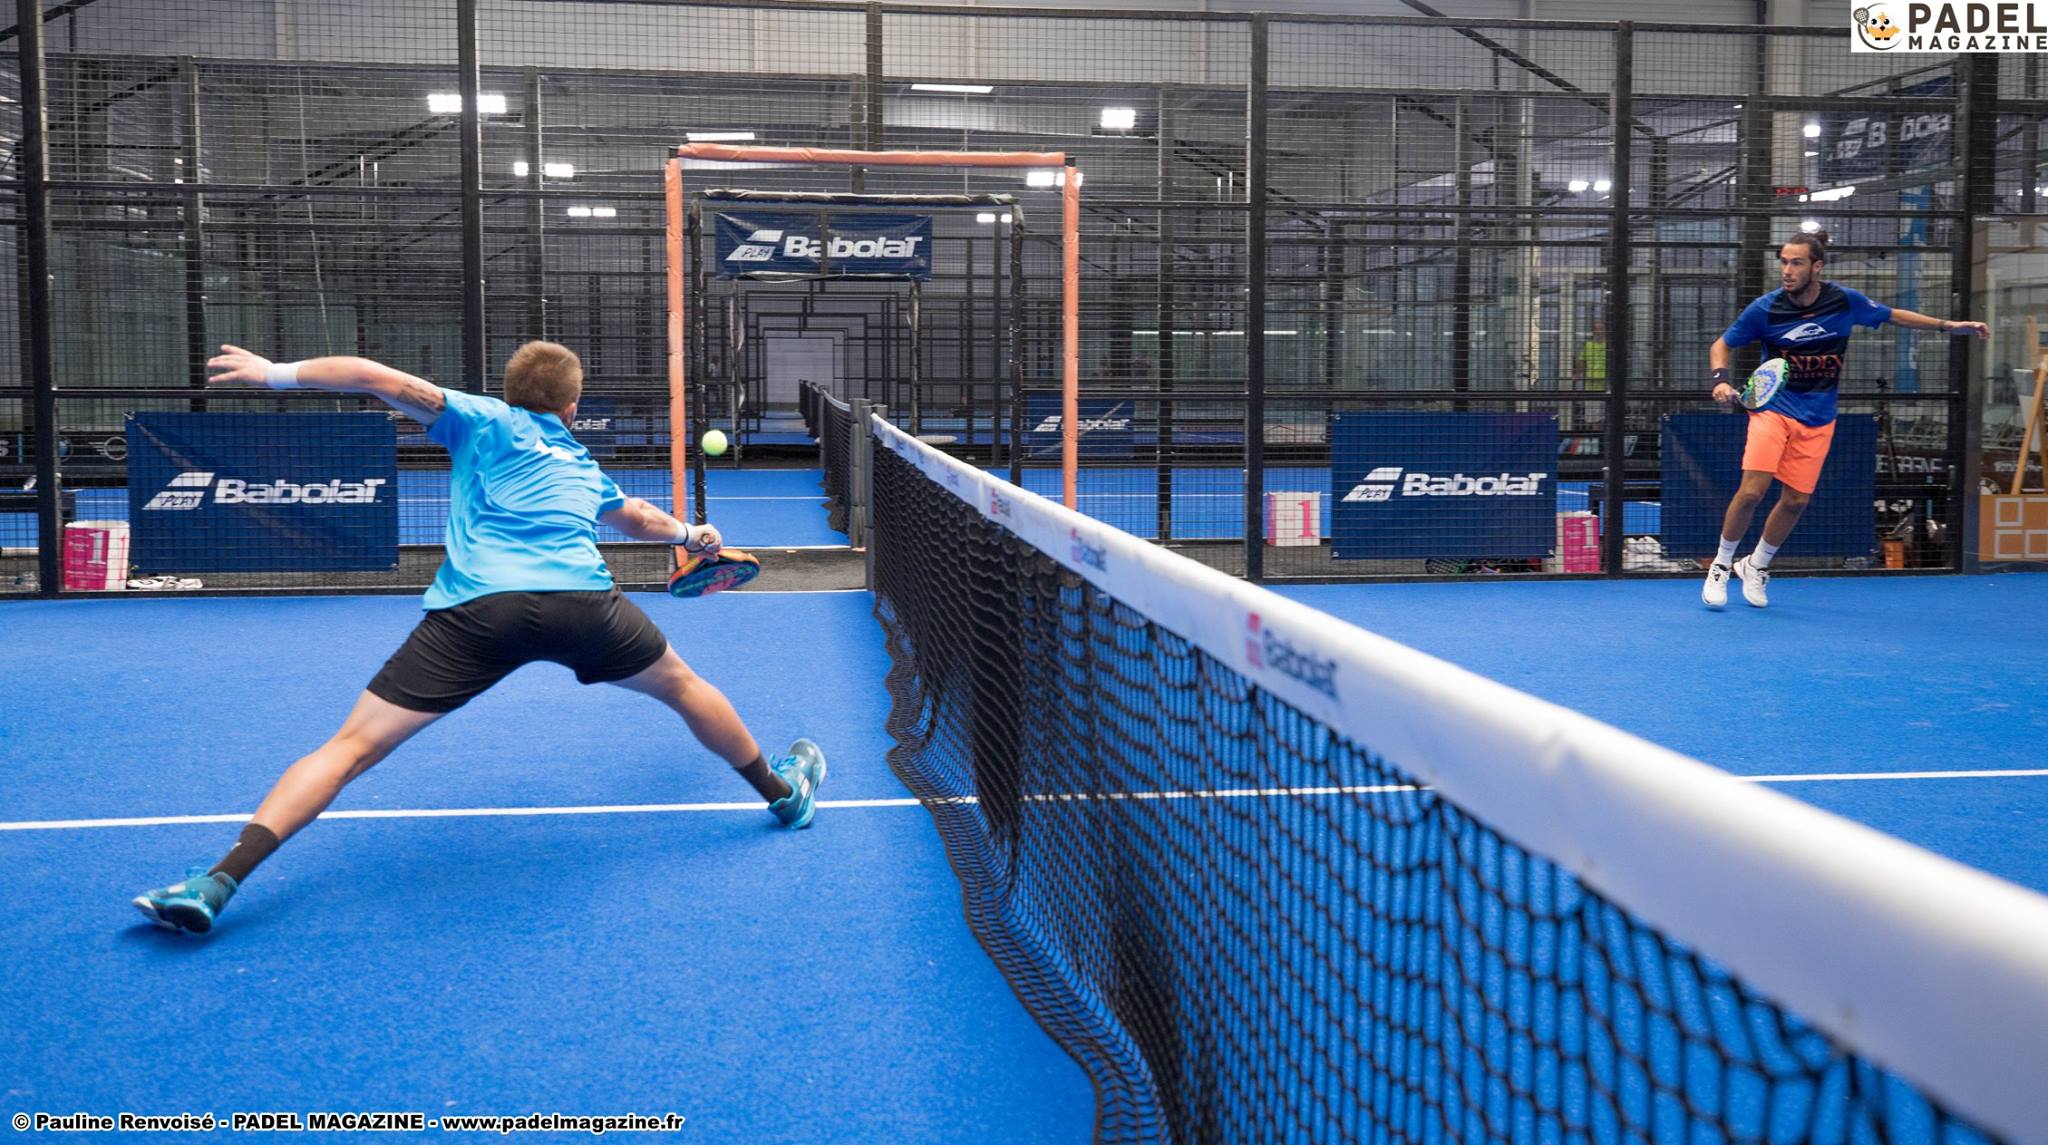 Padel in competitie: risico op spanning?